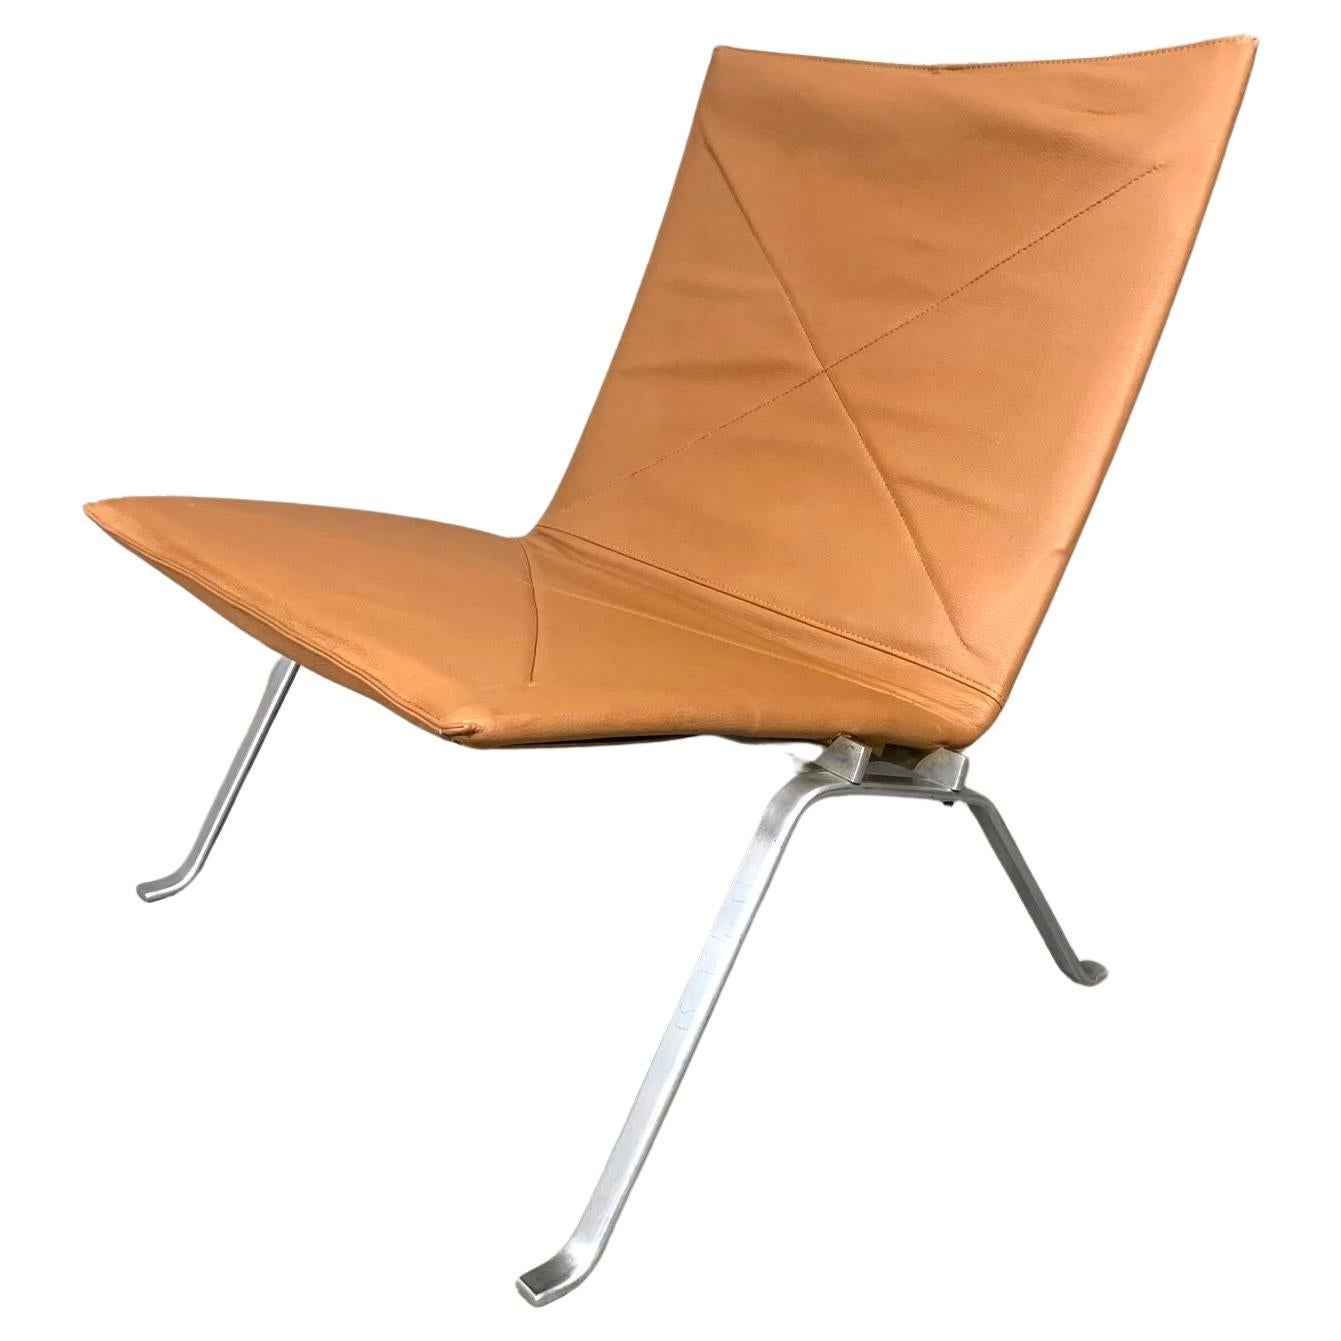 PK 22 Lounge Chair by Poul Kjærholm for E. Kold Christensen with Brown Leather